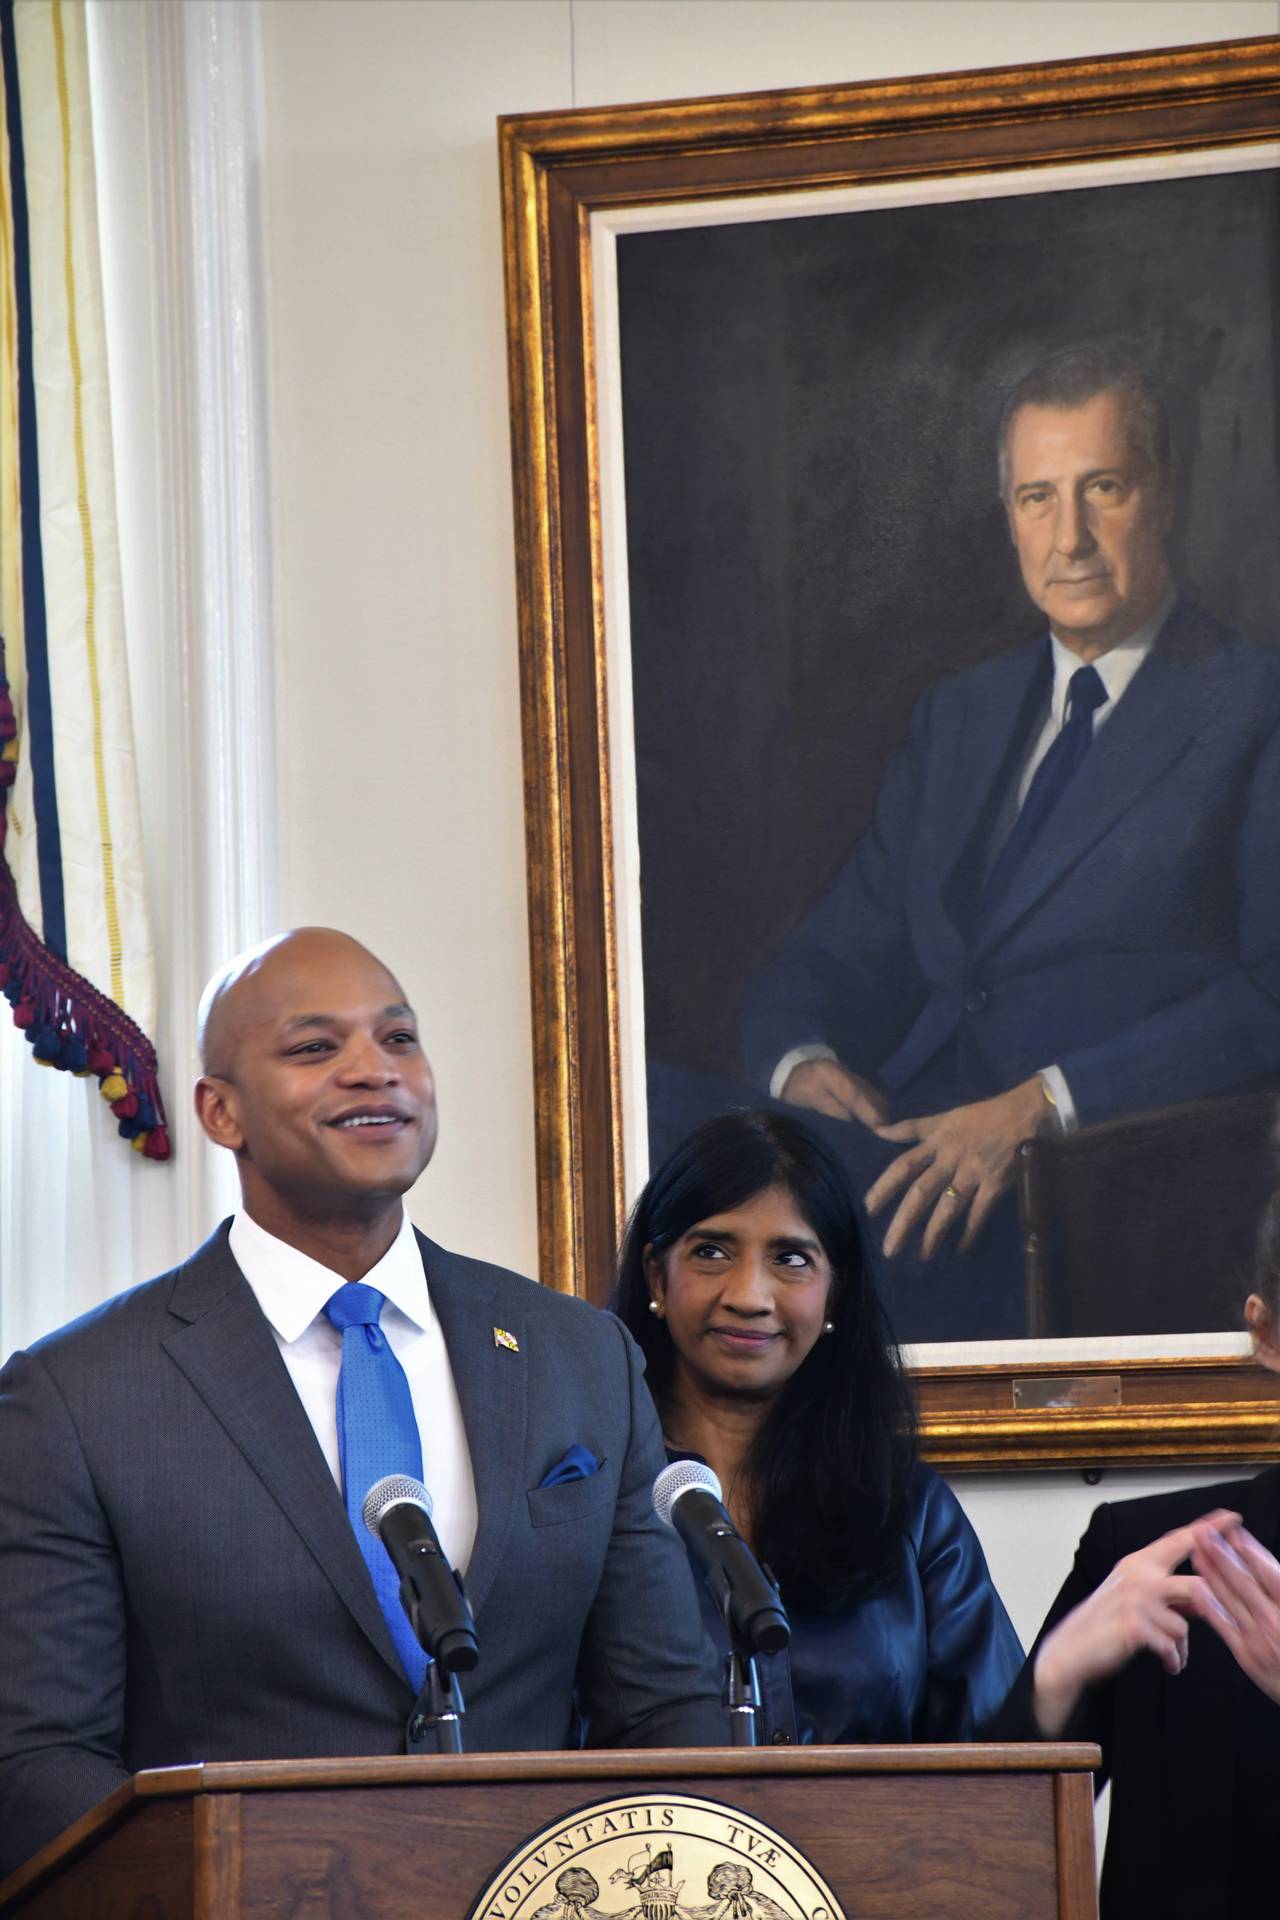 A portrait of Spiro Agnew, former governor and U.S. vice president, hangs behind Gov. Wes Moore as the governor speaks during a bill-signing ceremony at the State House on April 24, 2023. Beside Moore is Lt. Gov. Aruna Miller.